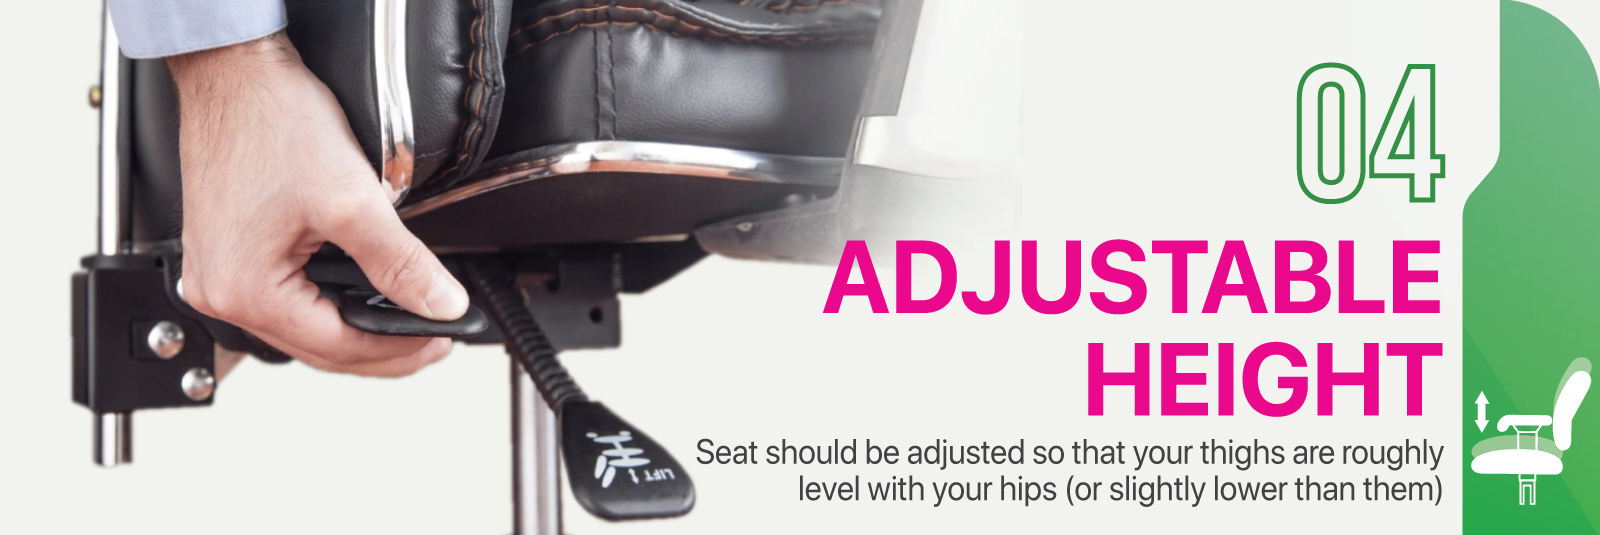 Adjustable Height - Seat should be adjusted so that your thighs are roughly level with your hips (or slightly lower than them)